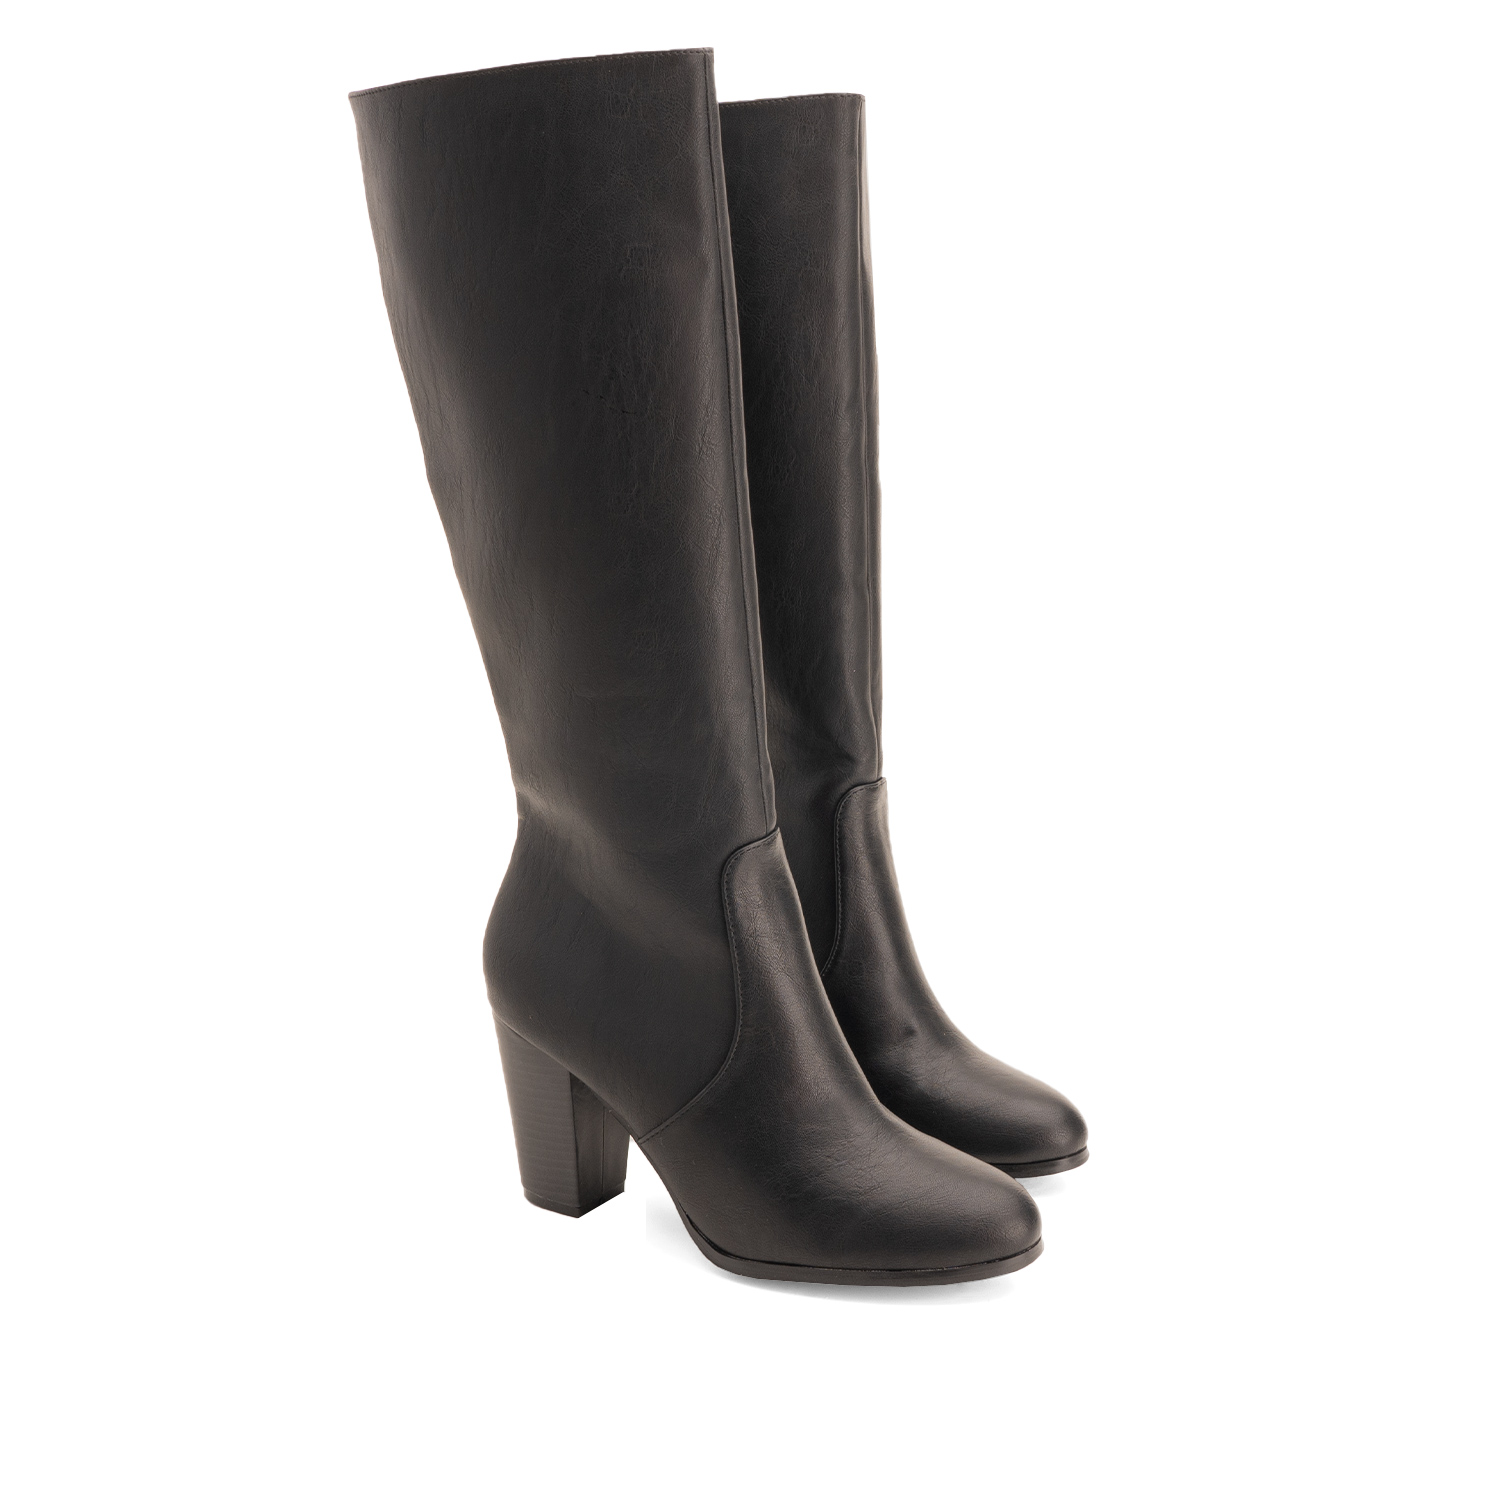 Heled mid-calf boots in black faux leather 